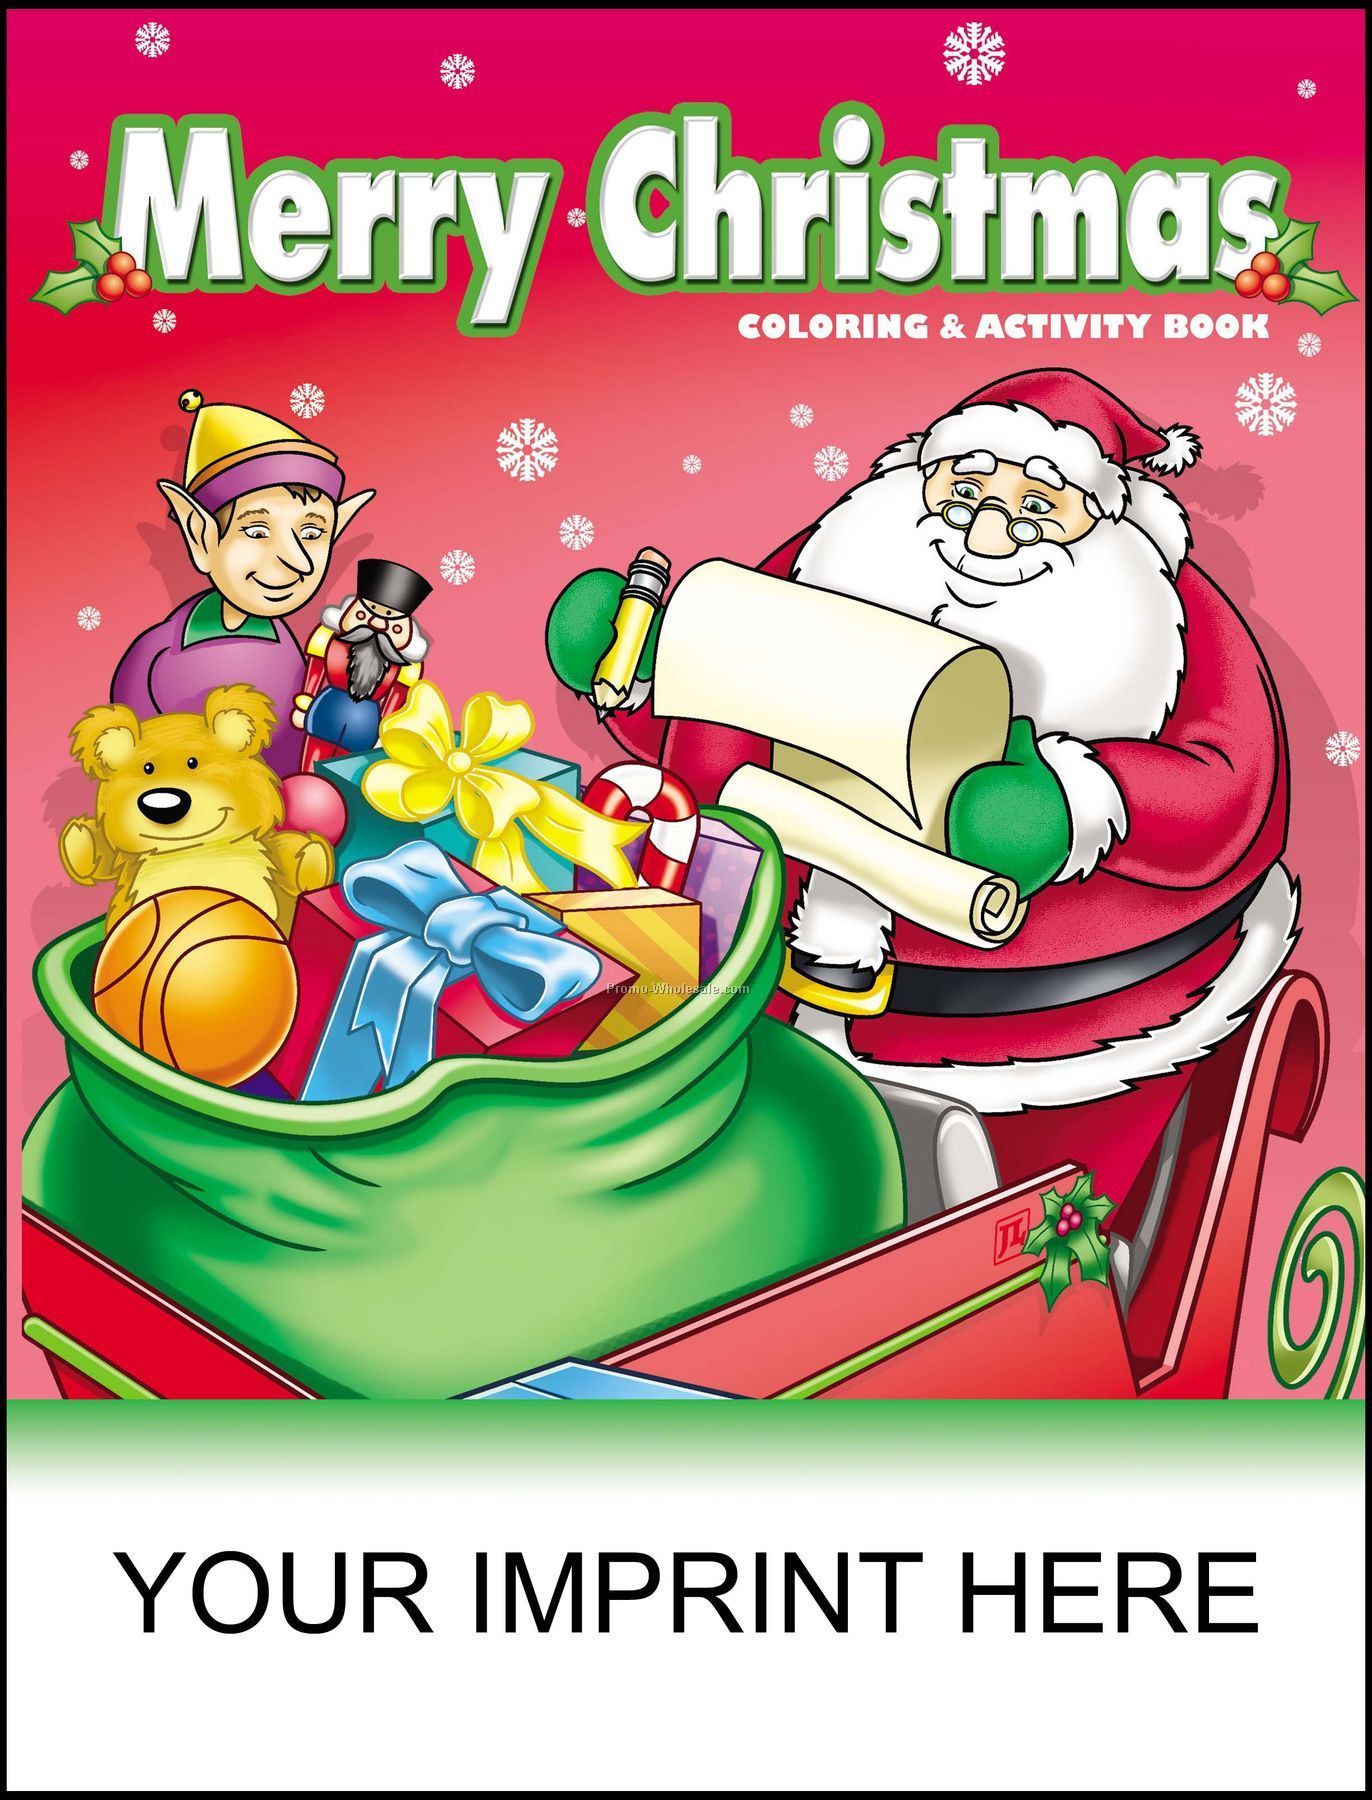 8-3/8"x10-7/8" Merry Christmas Coloring & Activity Red Book